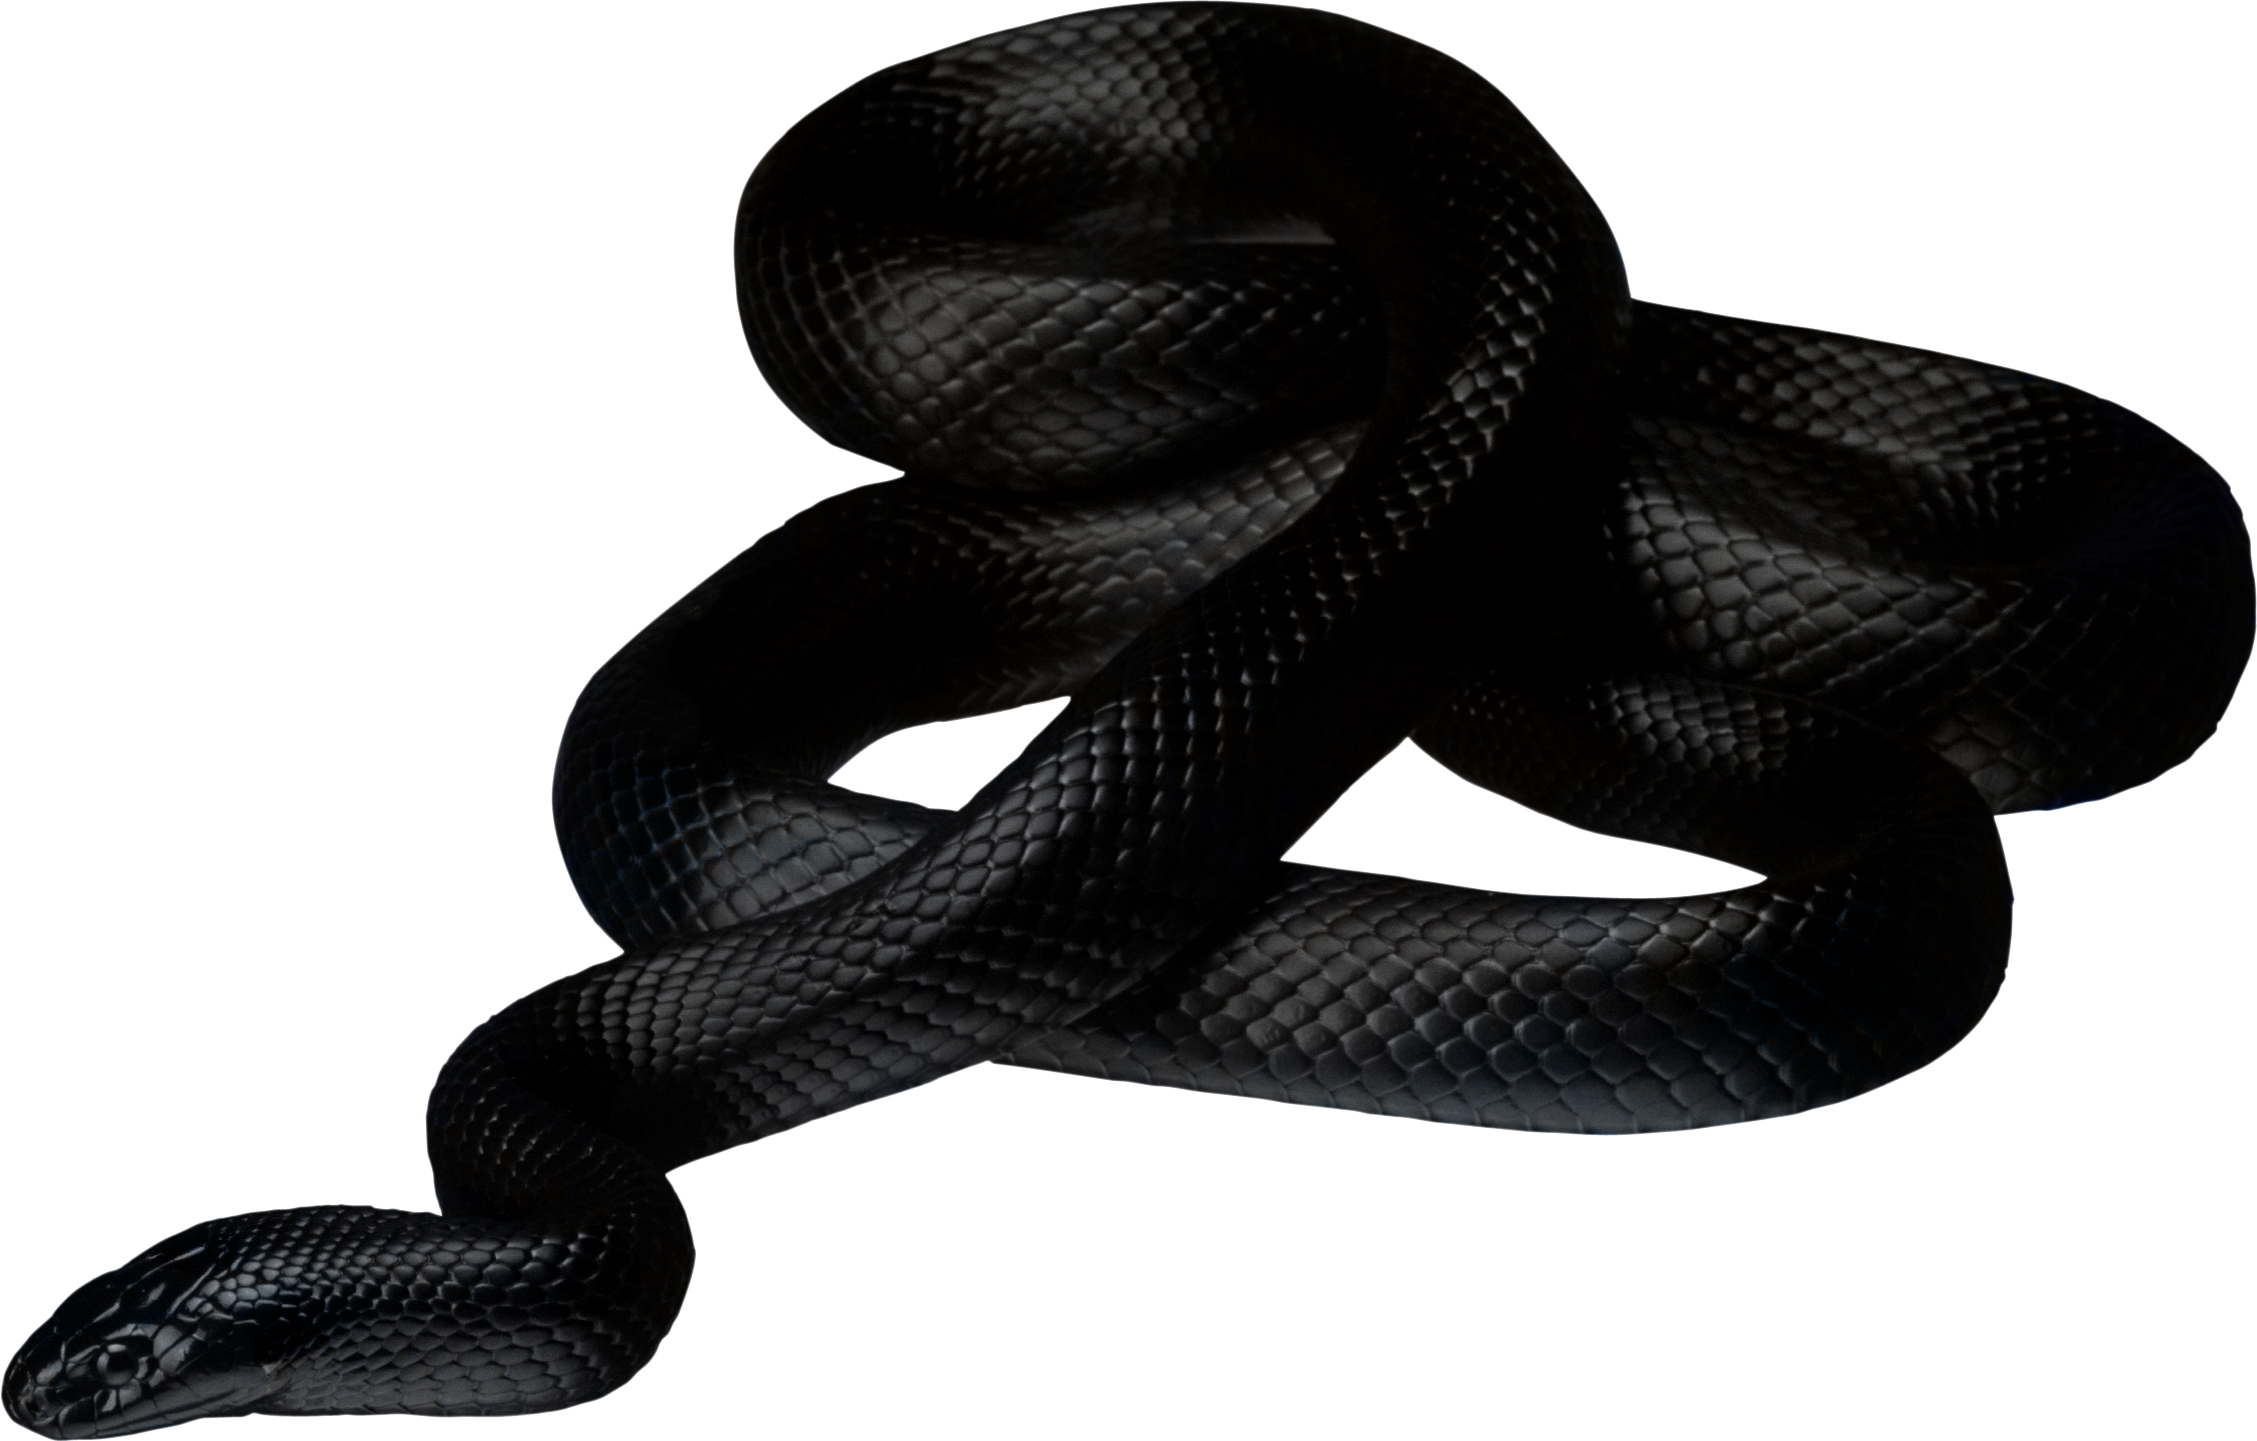 Black snake PNG image picture download free